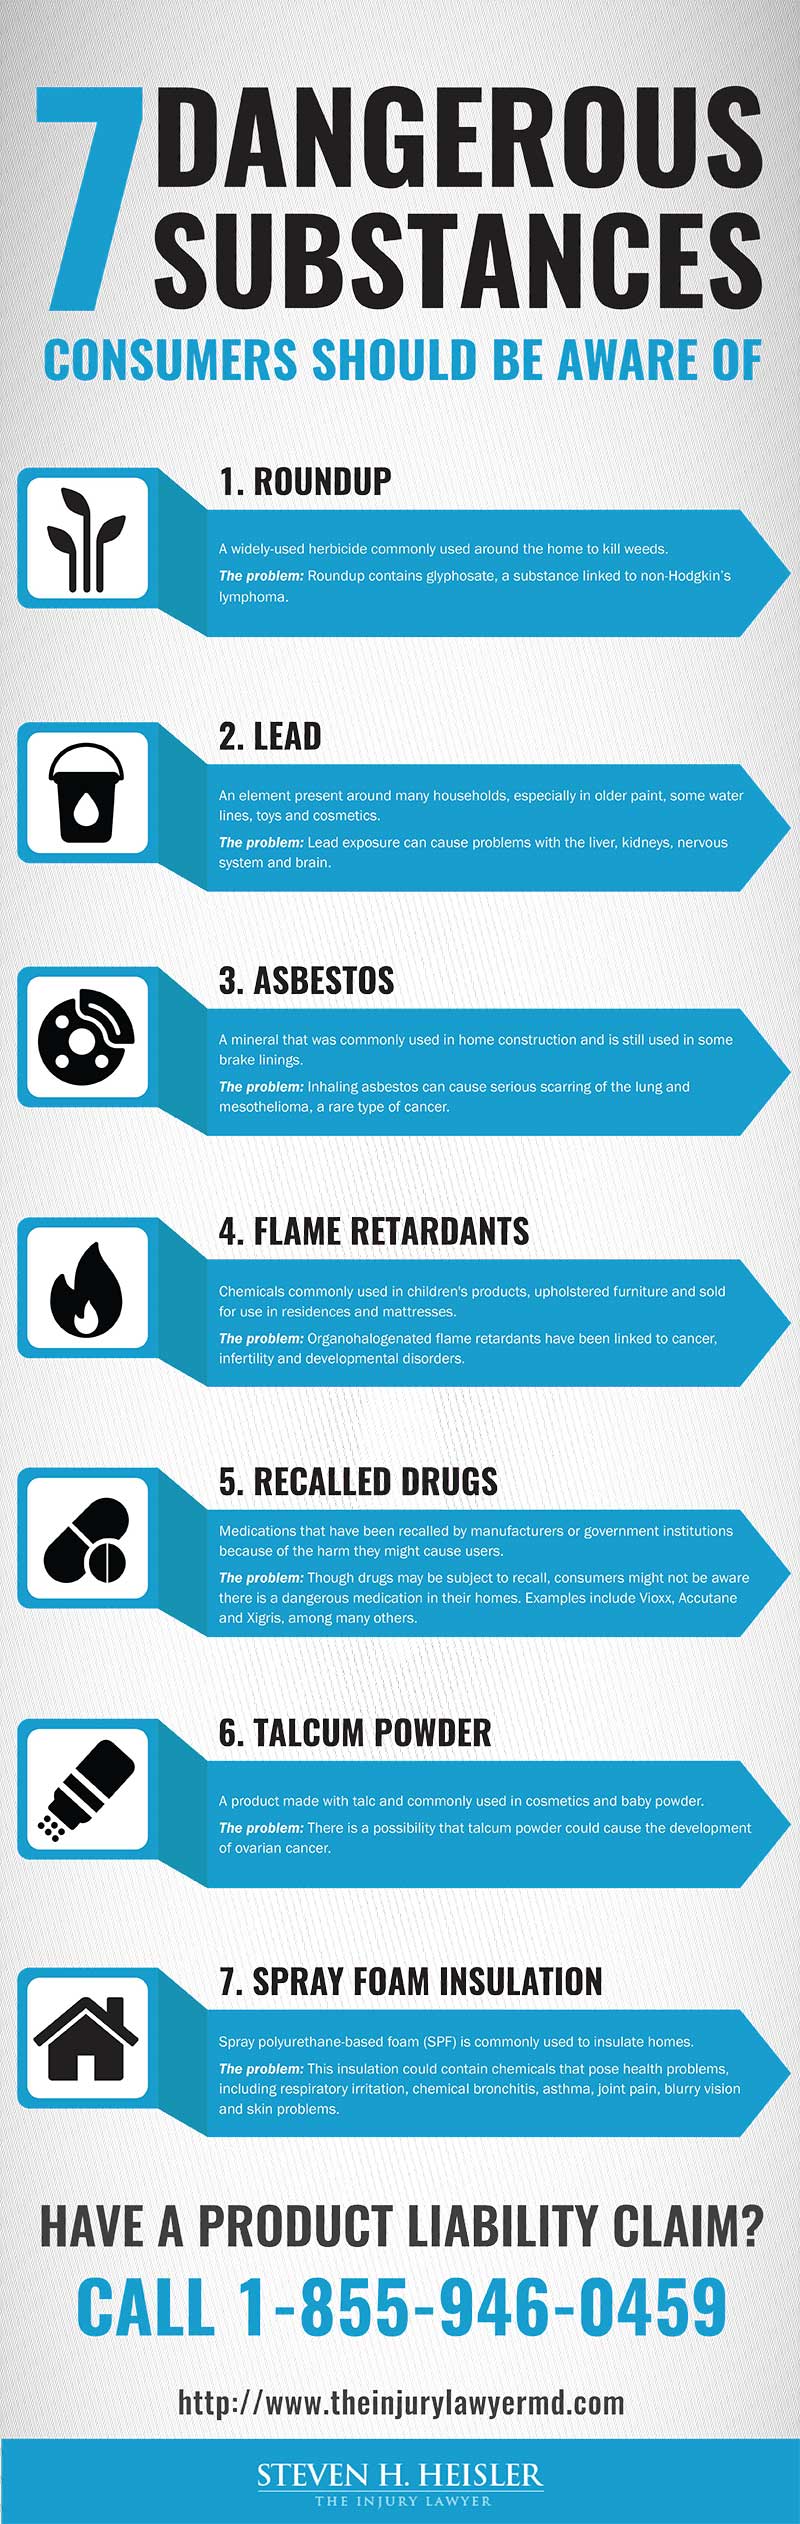 7 Dangerous Substances Consumers Should Be Aware Of